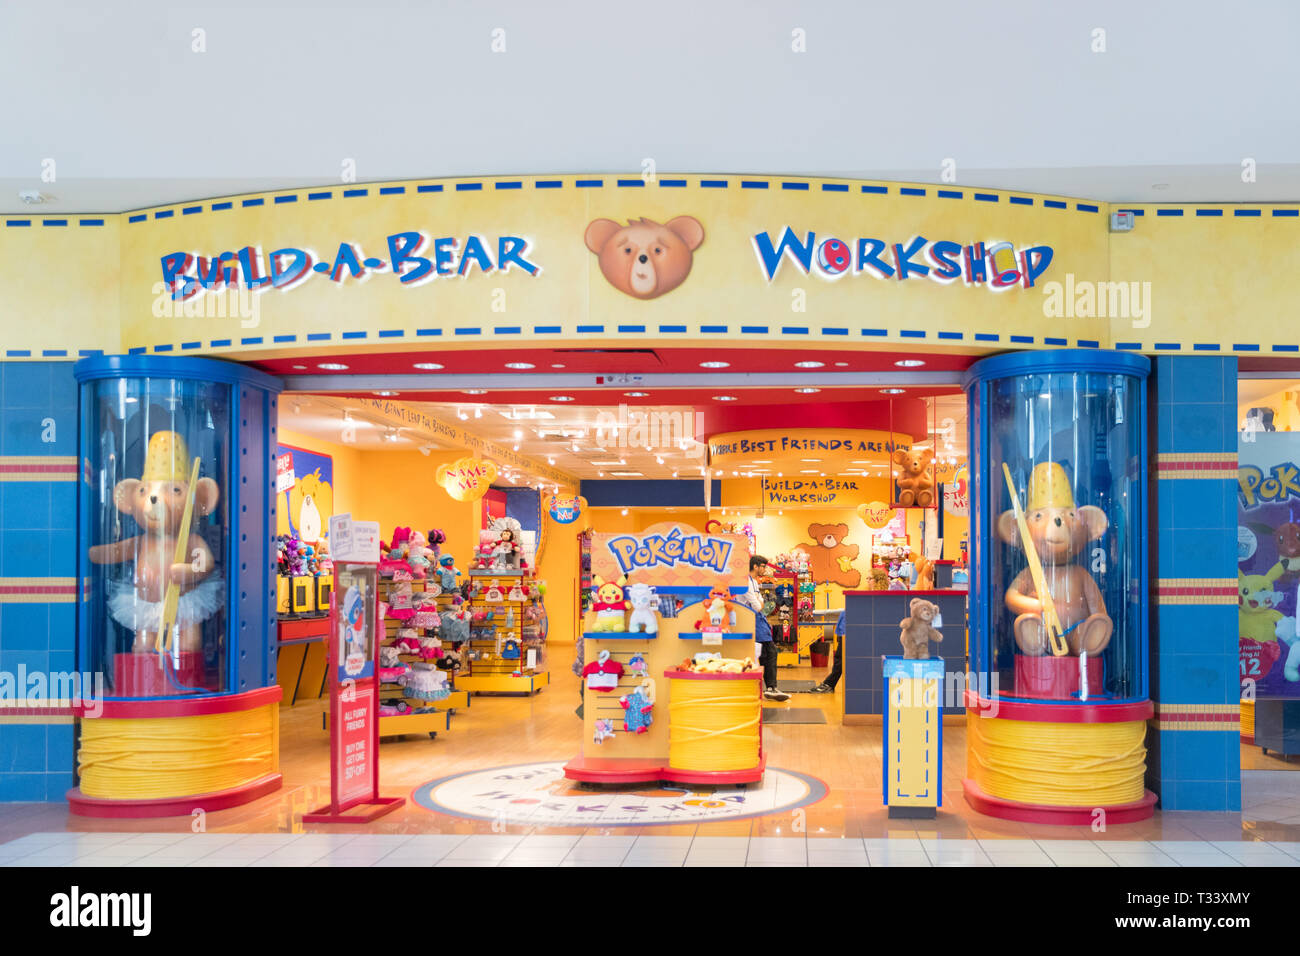 Philadelphia Pennsylvania，October 7 2018:Build-A-Bear Workshop store front, an American retailer that sells teddy bears and other stuffed animals. Stock Photo